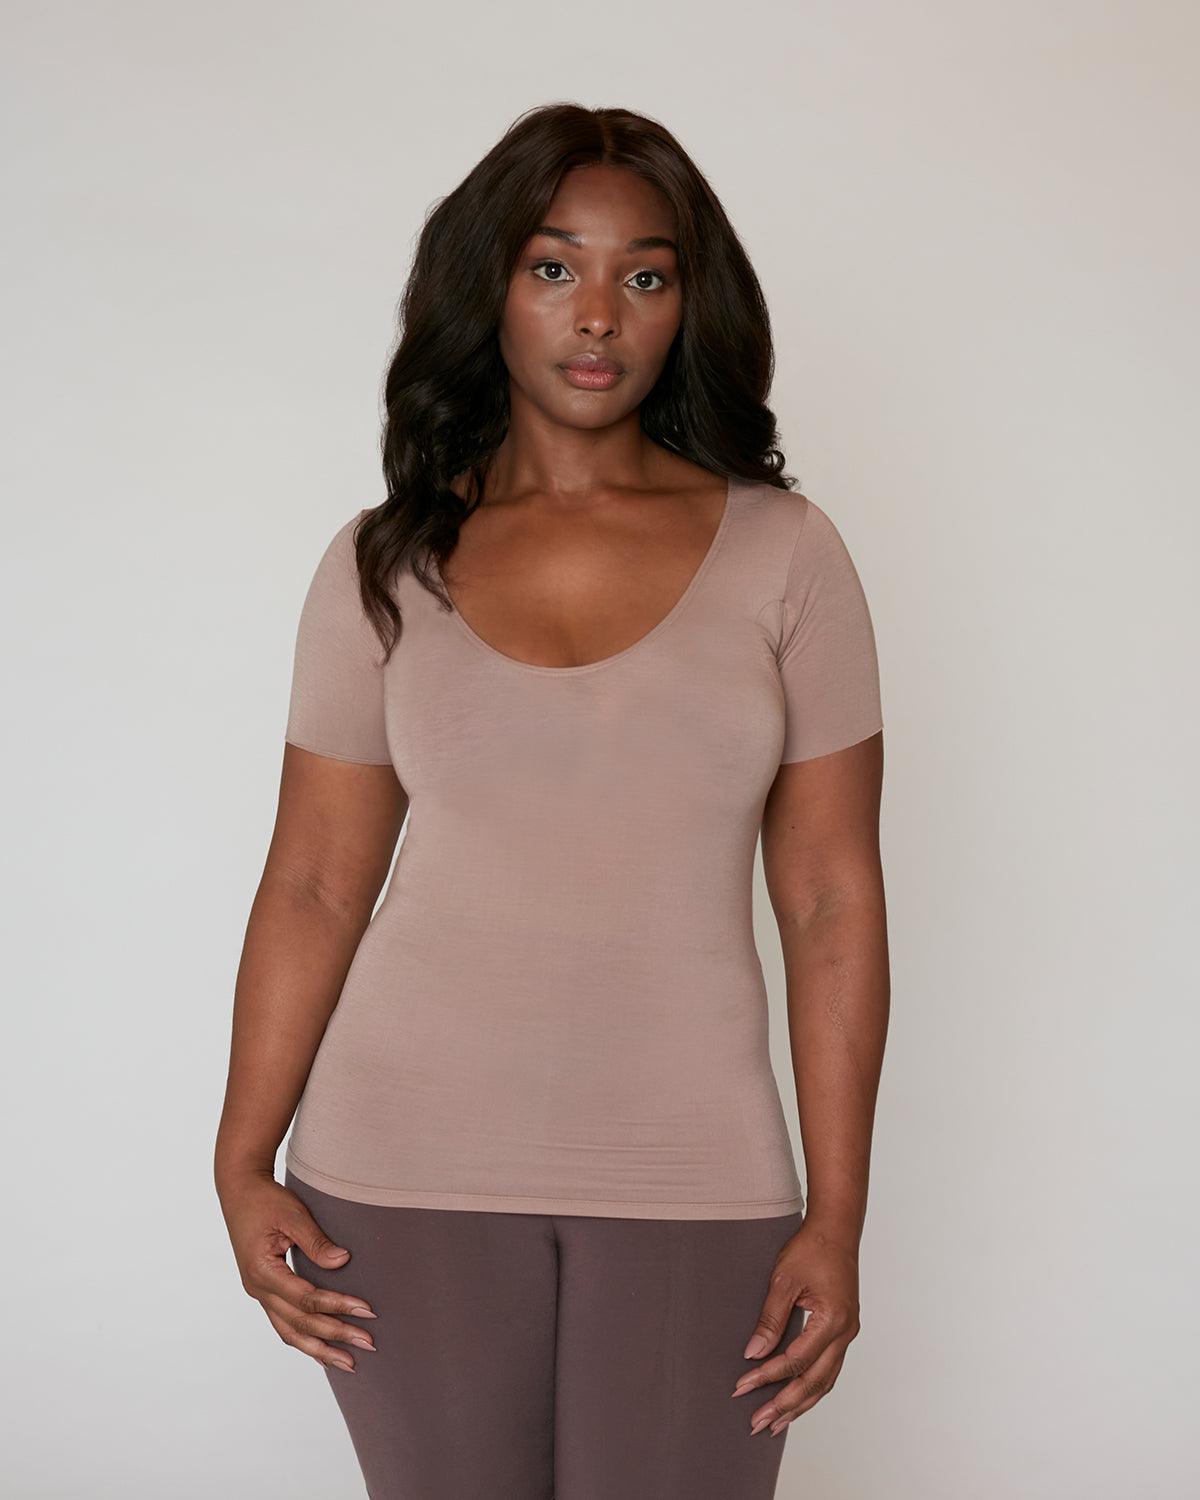 "#color_toffee| Tolu is 5'7.5" and wears a size M